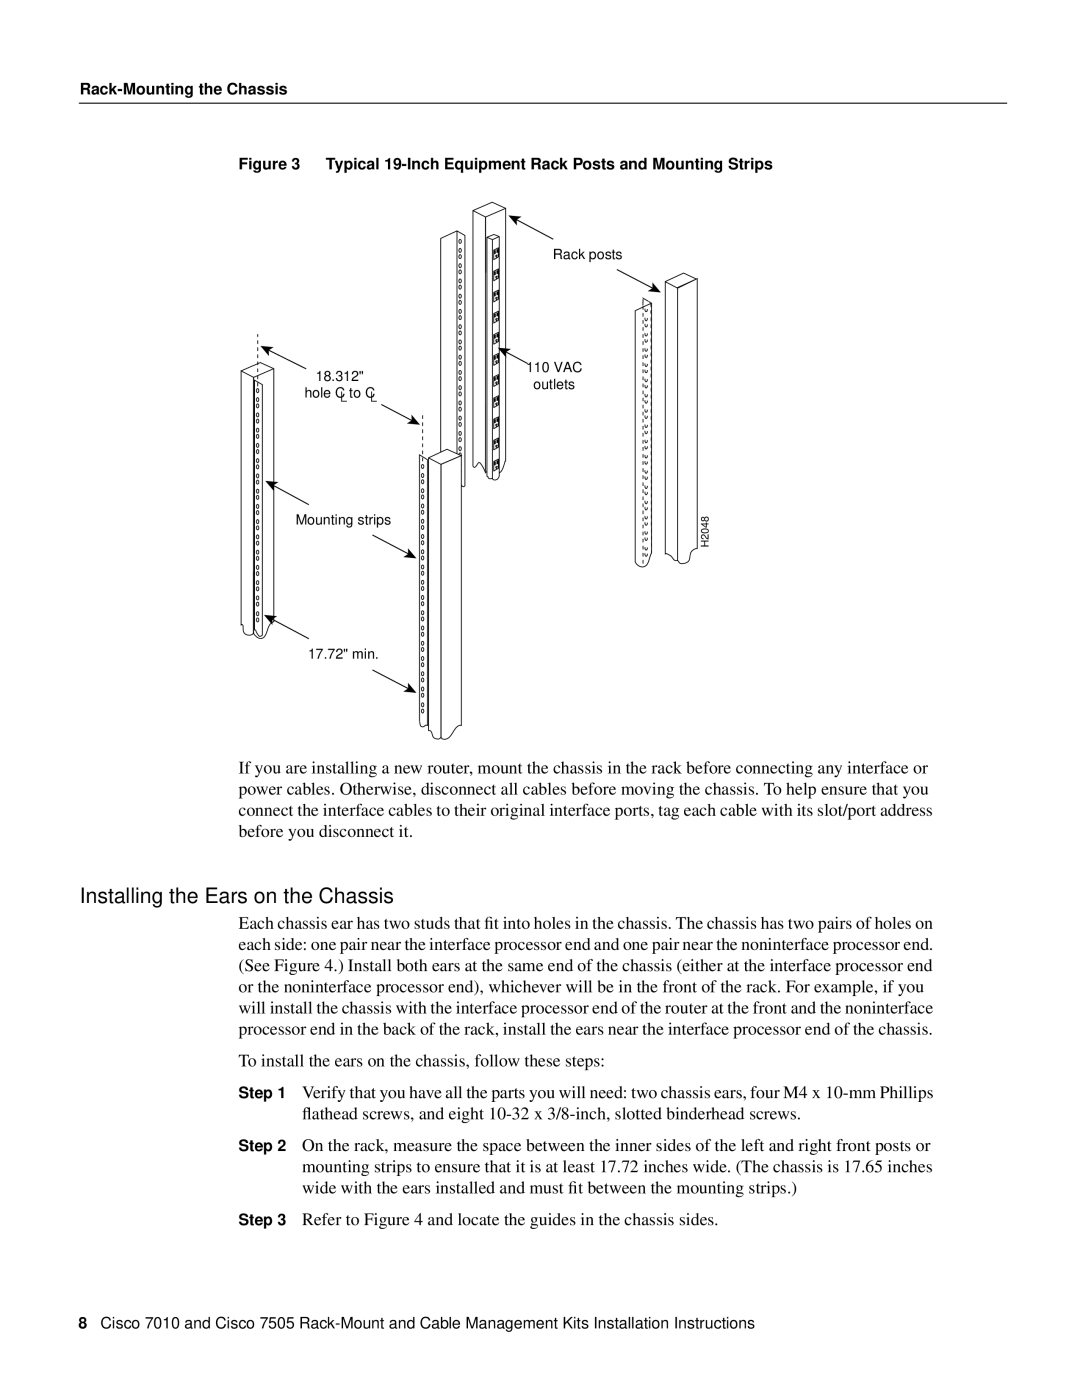 Cisco Systems Cisco 7505/7010 installation instructions Installing the Ears on the Chassis 